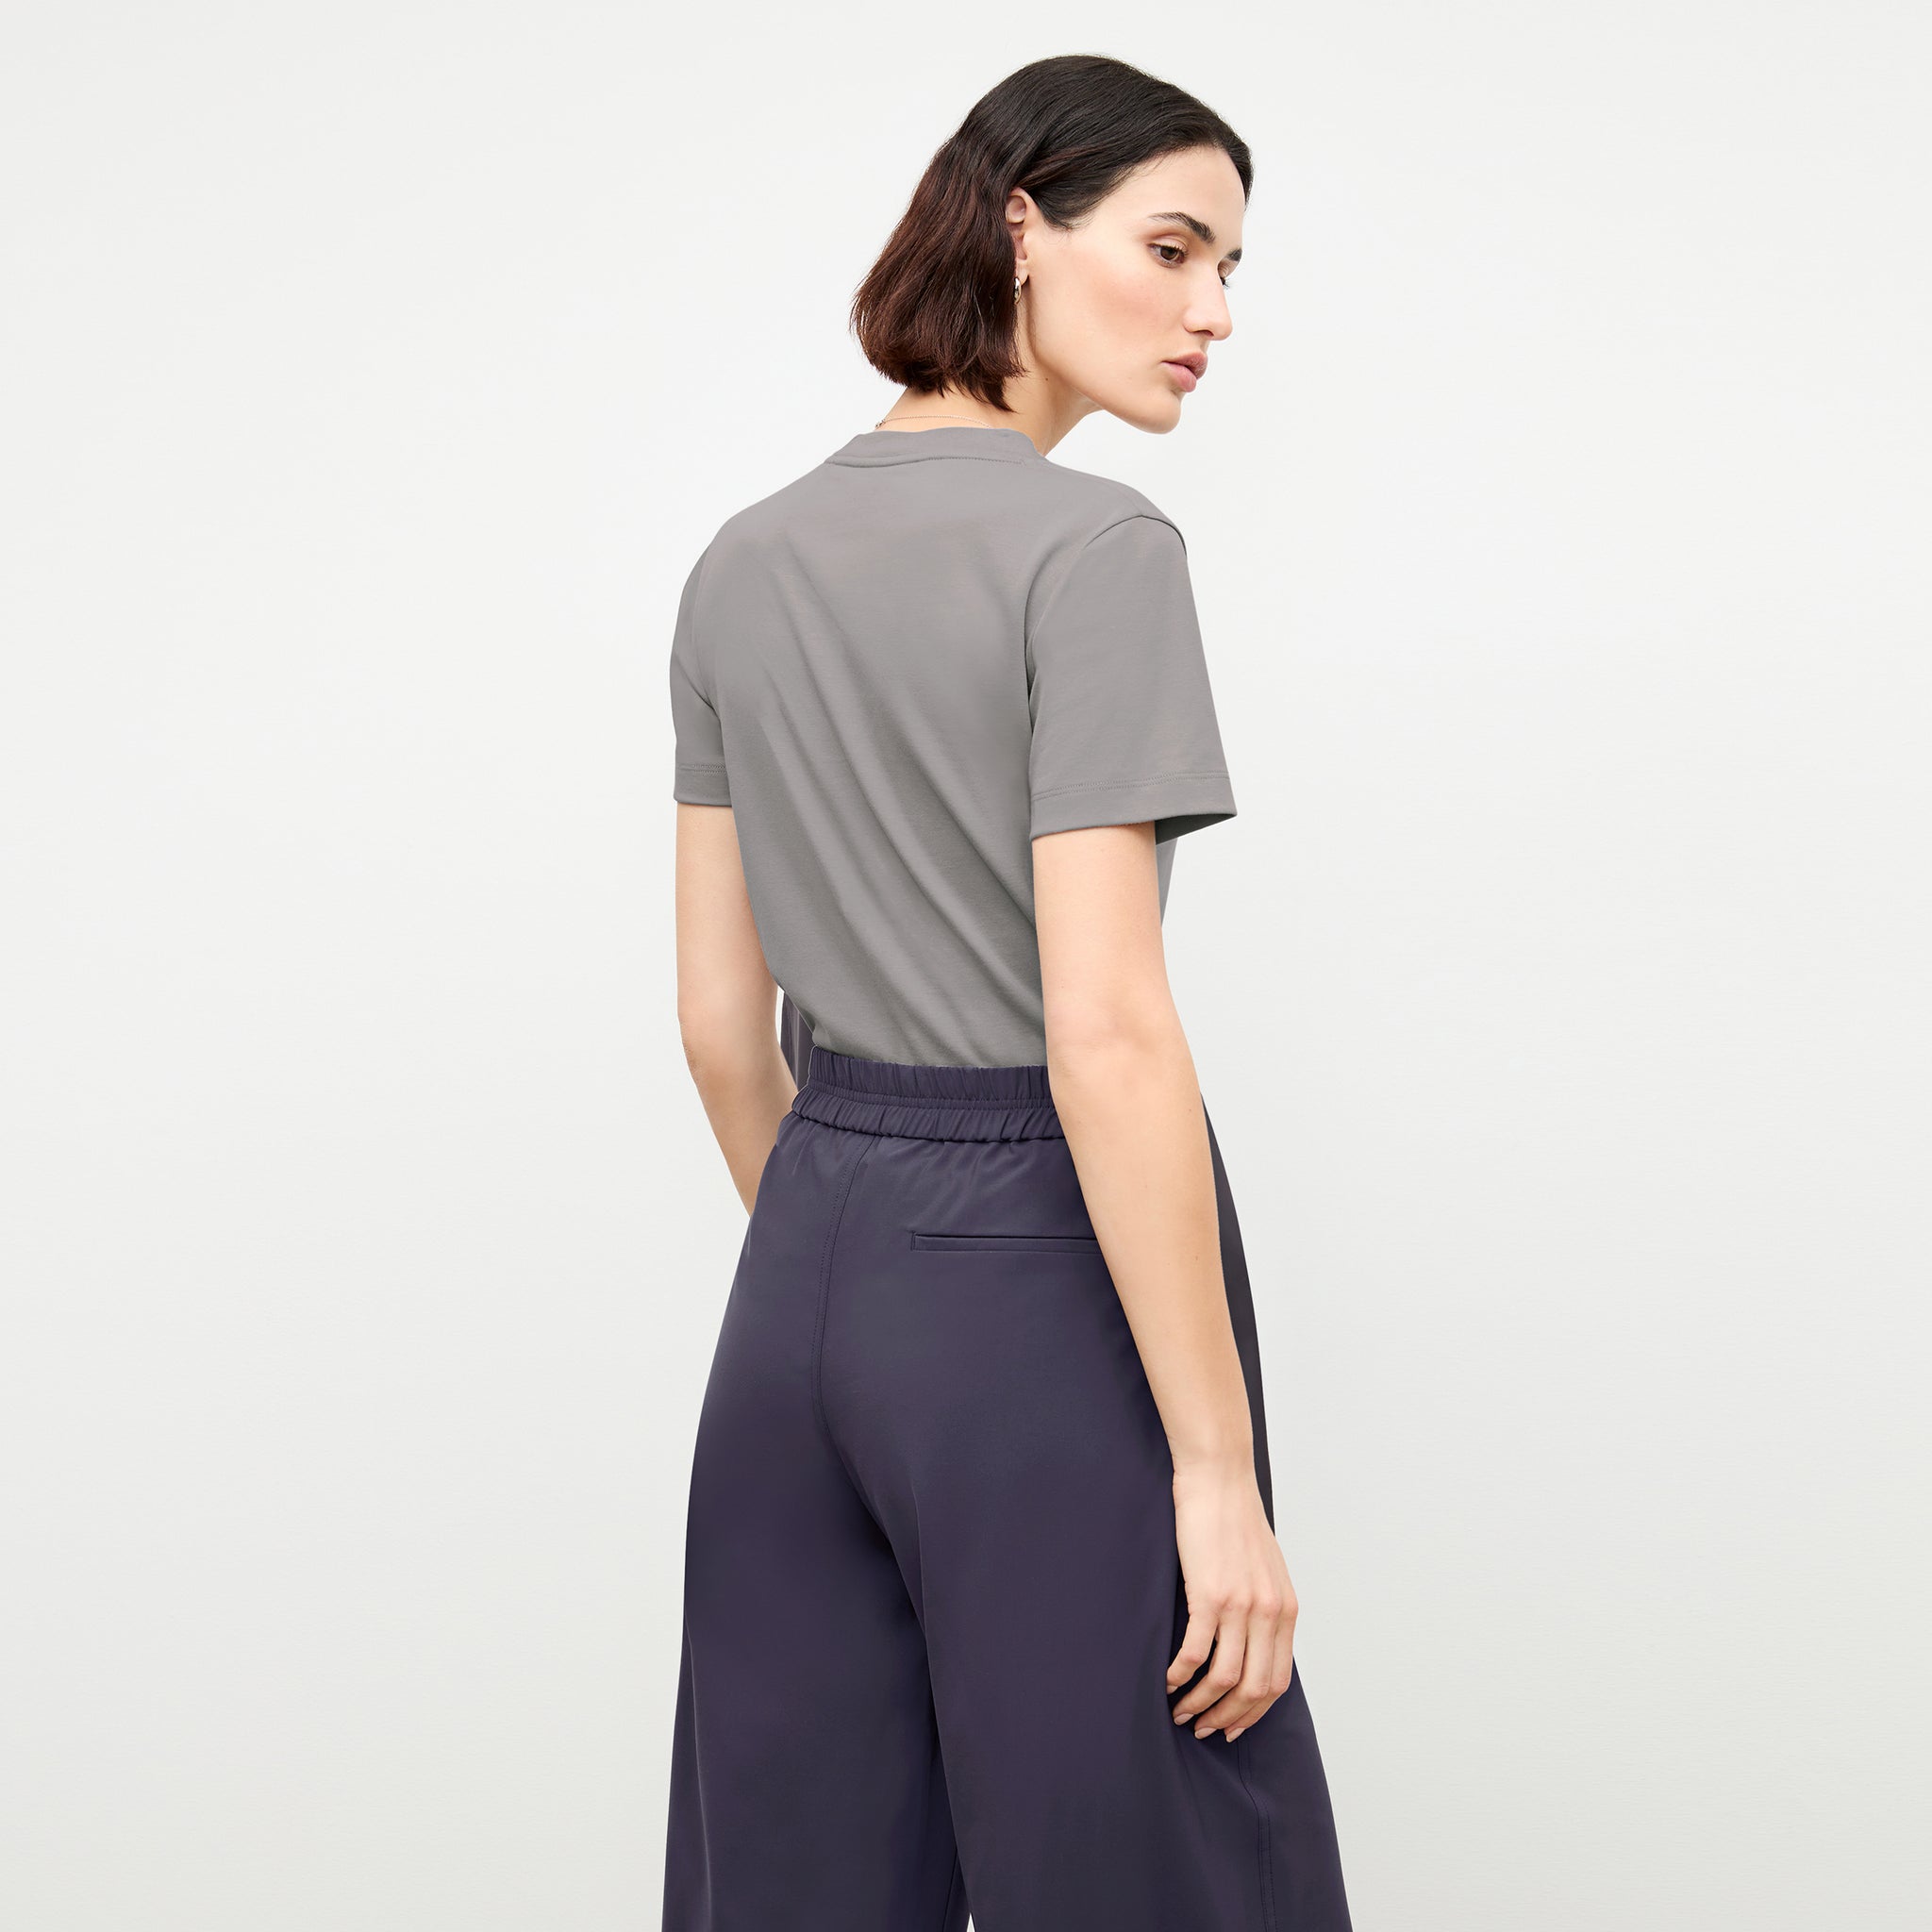 back image of a woman wearing the elena pant in cool charcoal